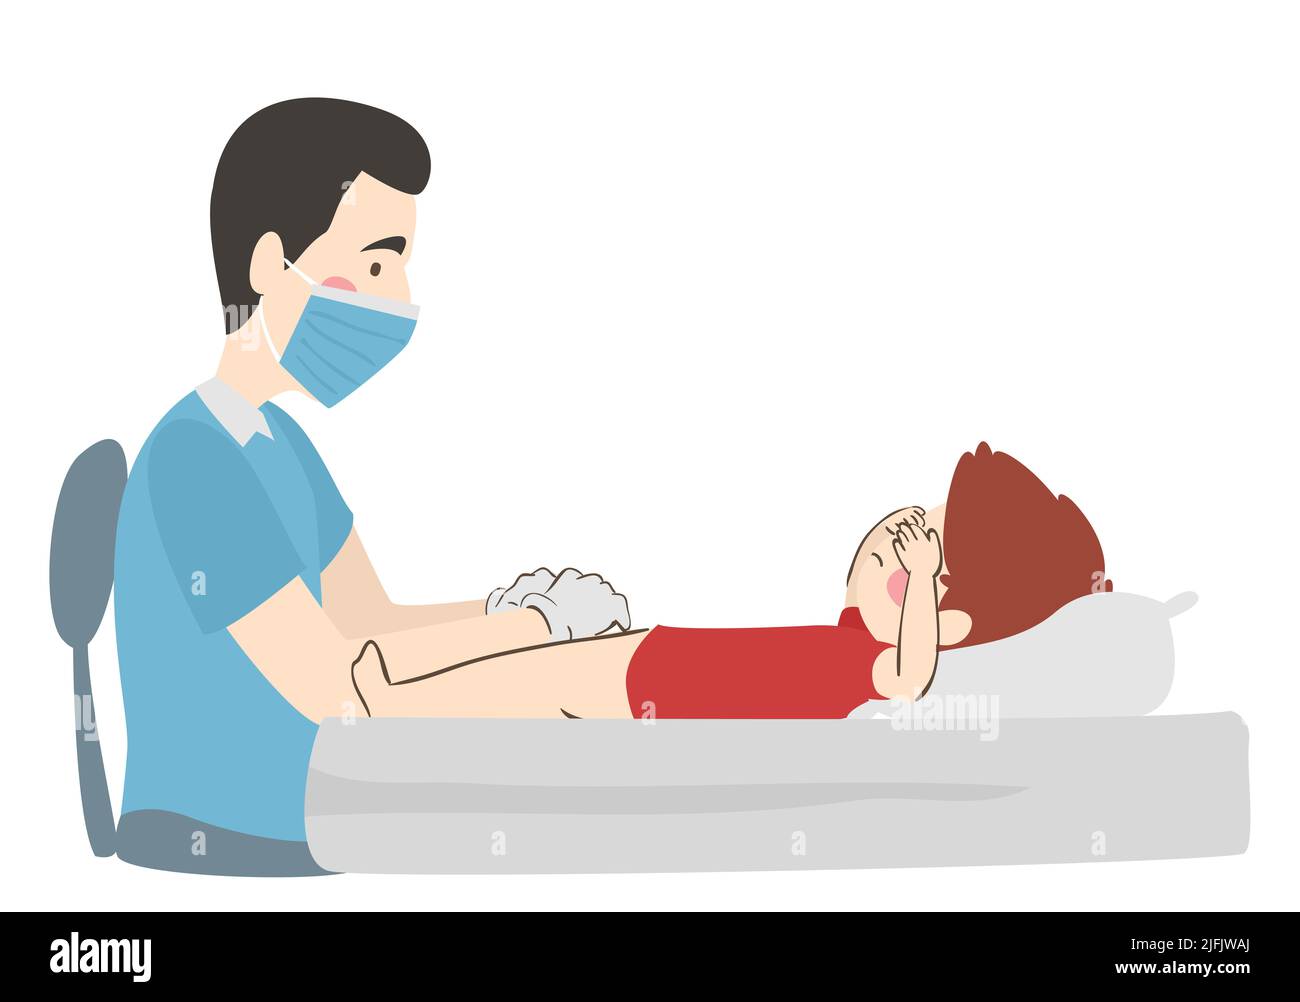 Illustration of Kid Boy Lying in Hospital Bed with His Doctor Performing Circumcision Stock Photo